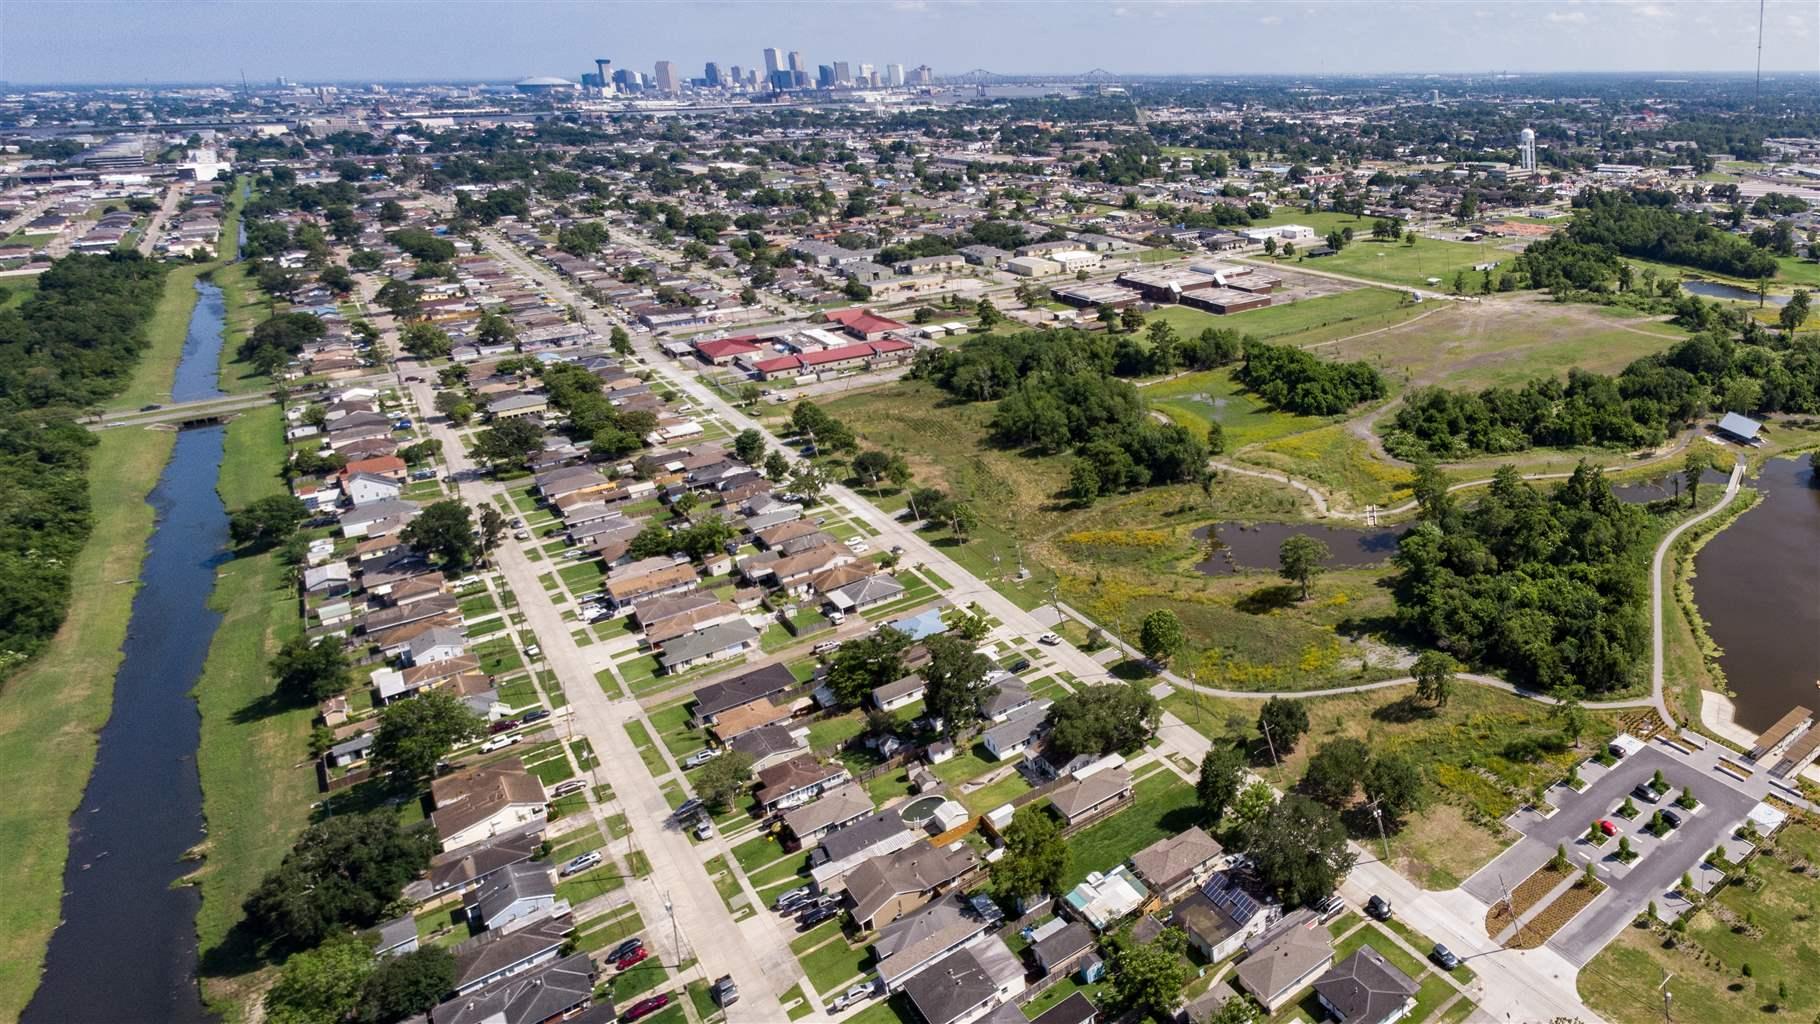 An aerial view shows a residential neighborhood with a waterway on the left and a large park, with a lake, trees, and several grassy areas, to the right. Developed areas surround the other sides of the park, and a city skyline rises in the distance.